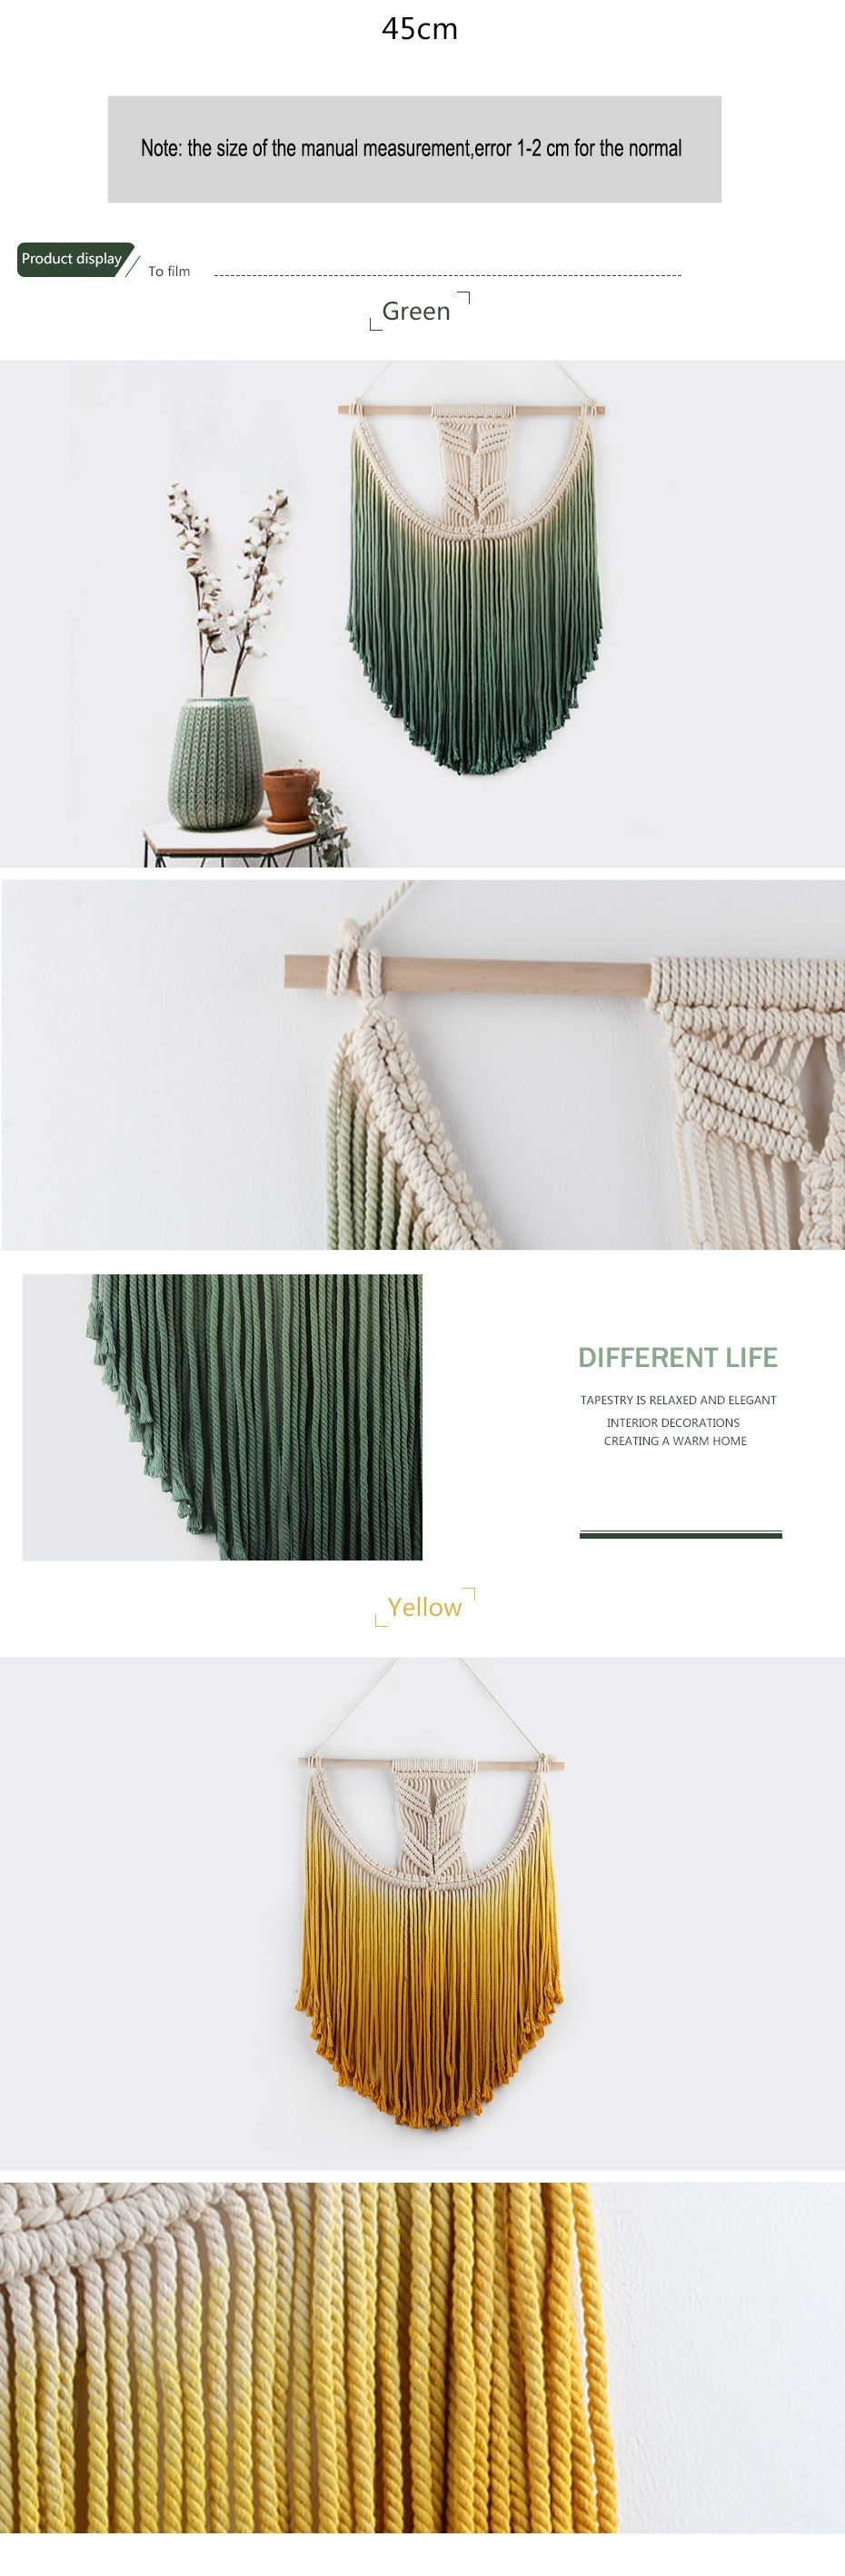 Green Ombre Macramé Wall Hanging Tapestry - Bean Concept - Etsy